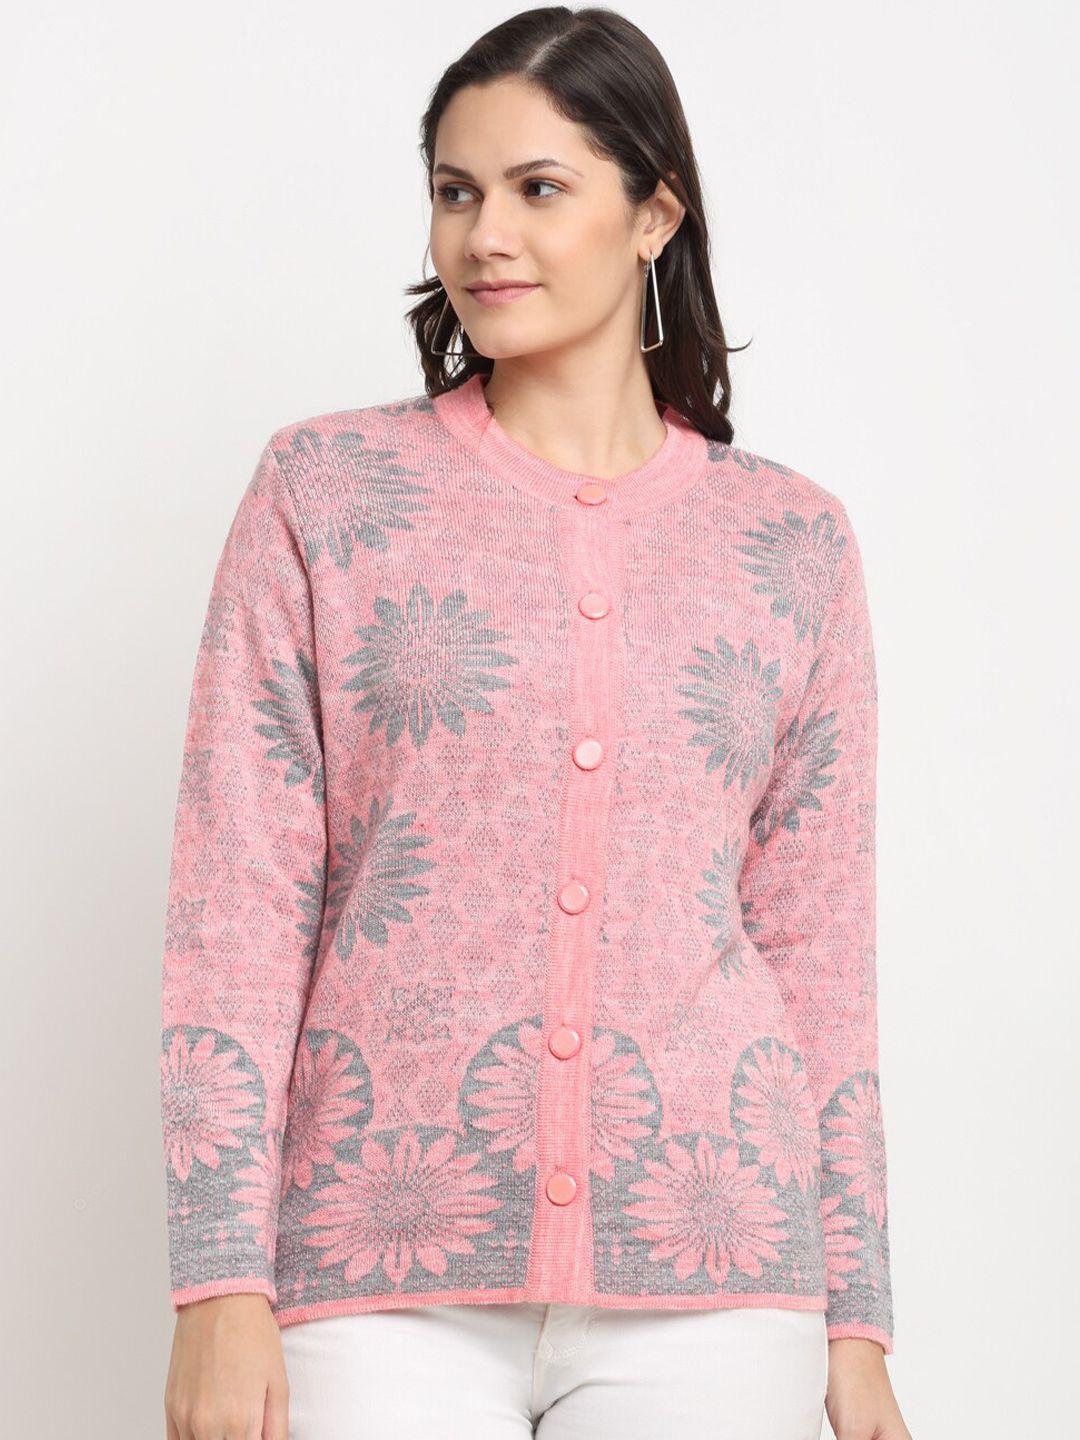 perfect line women pink & grey floral acrylic cardigan